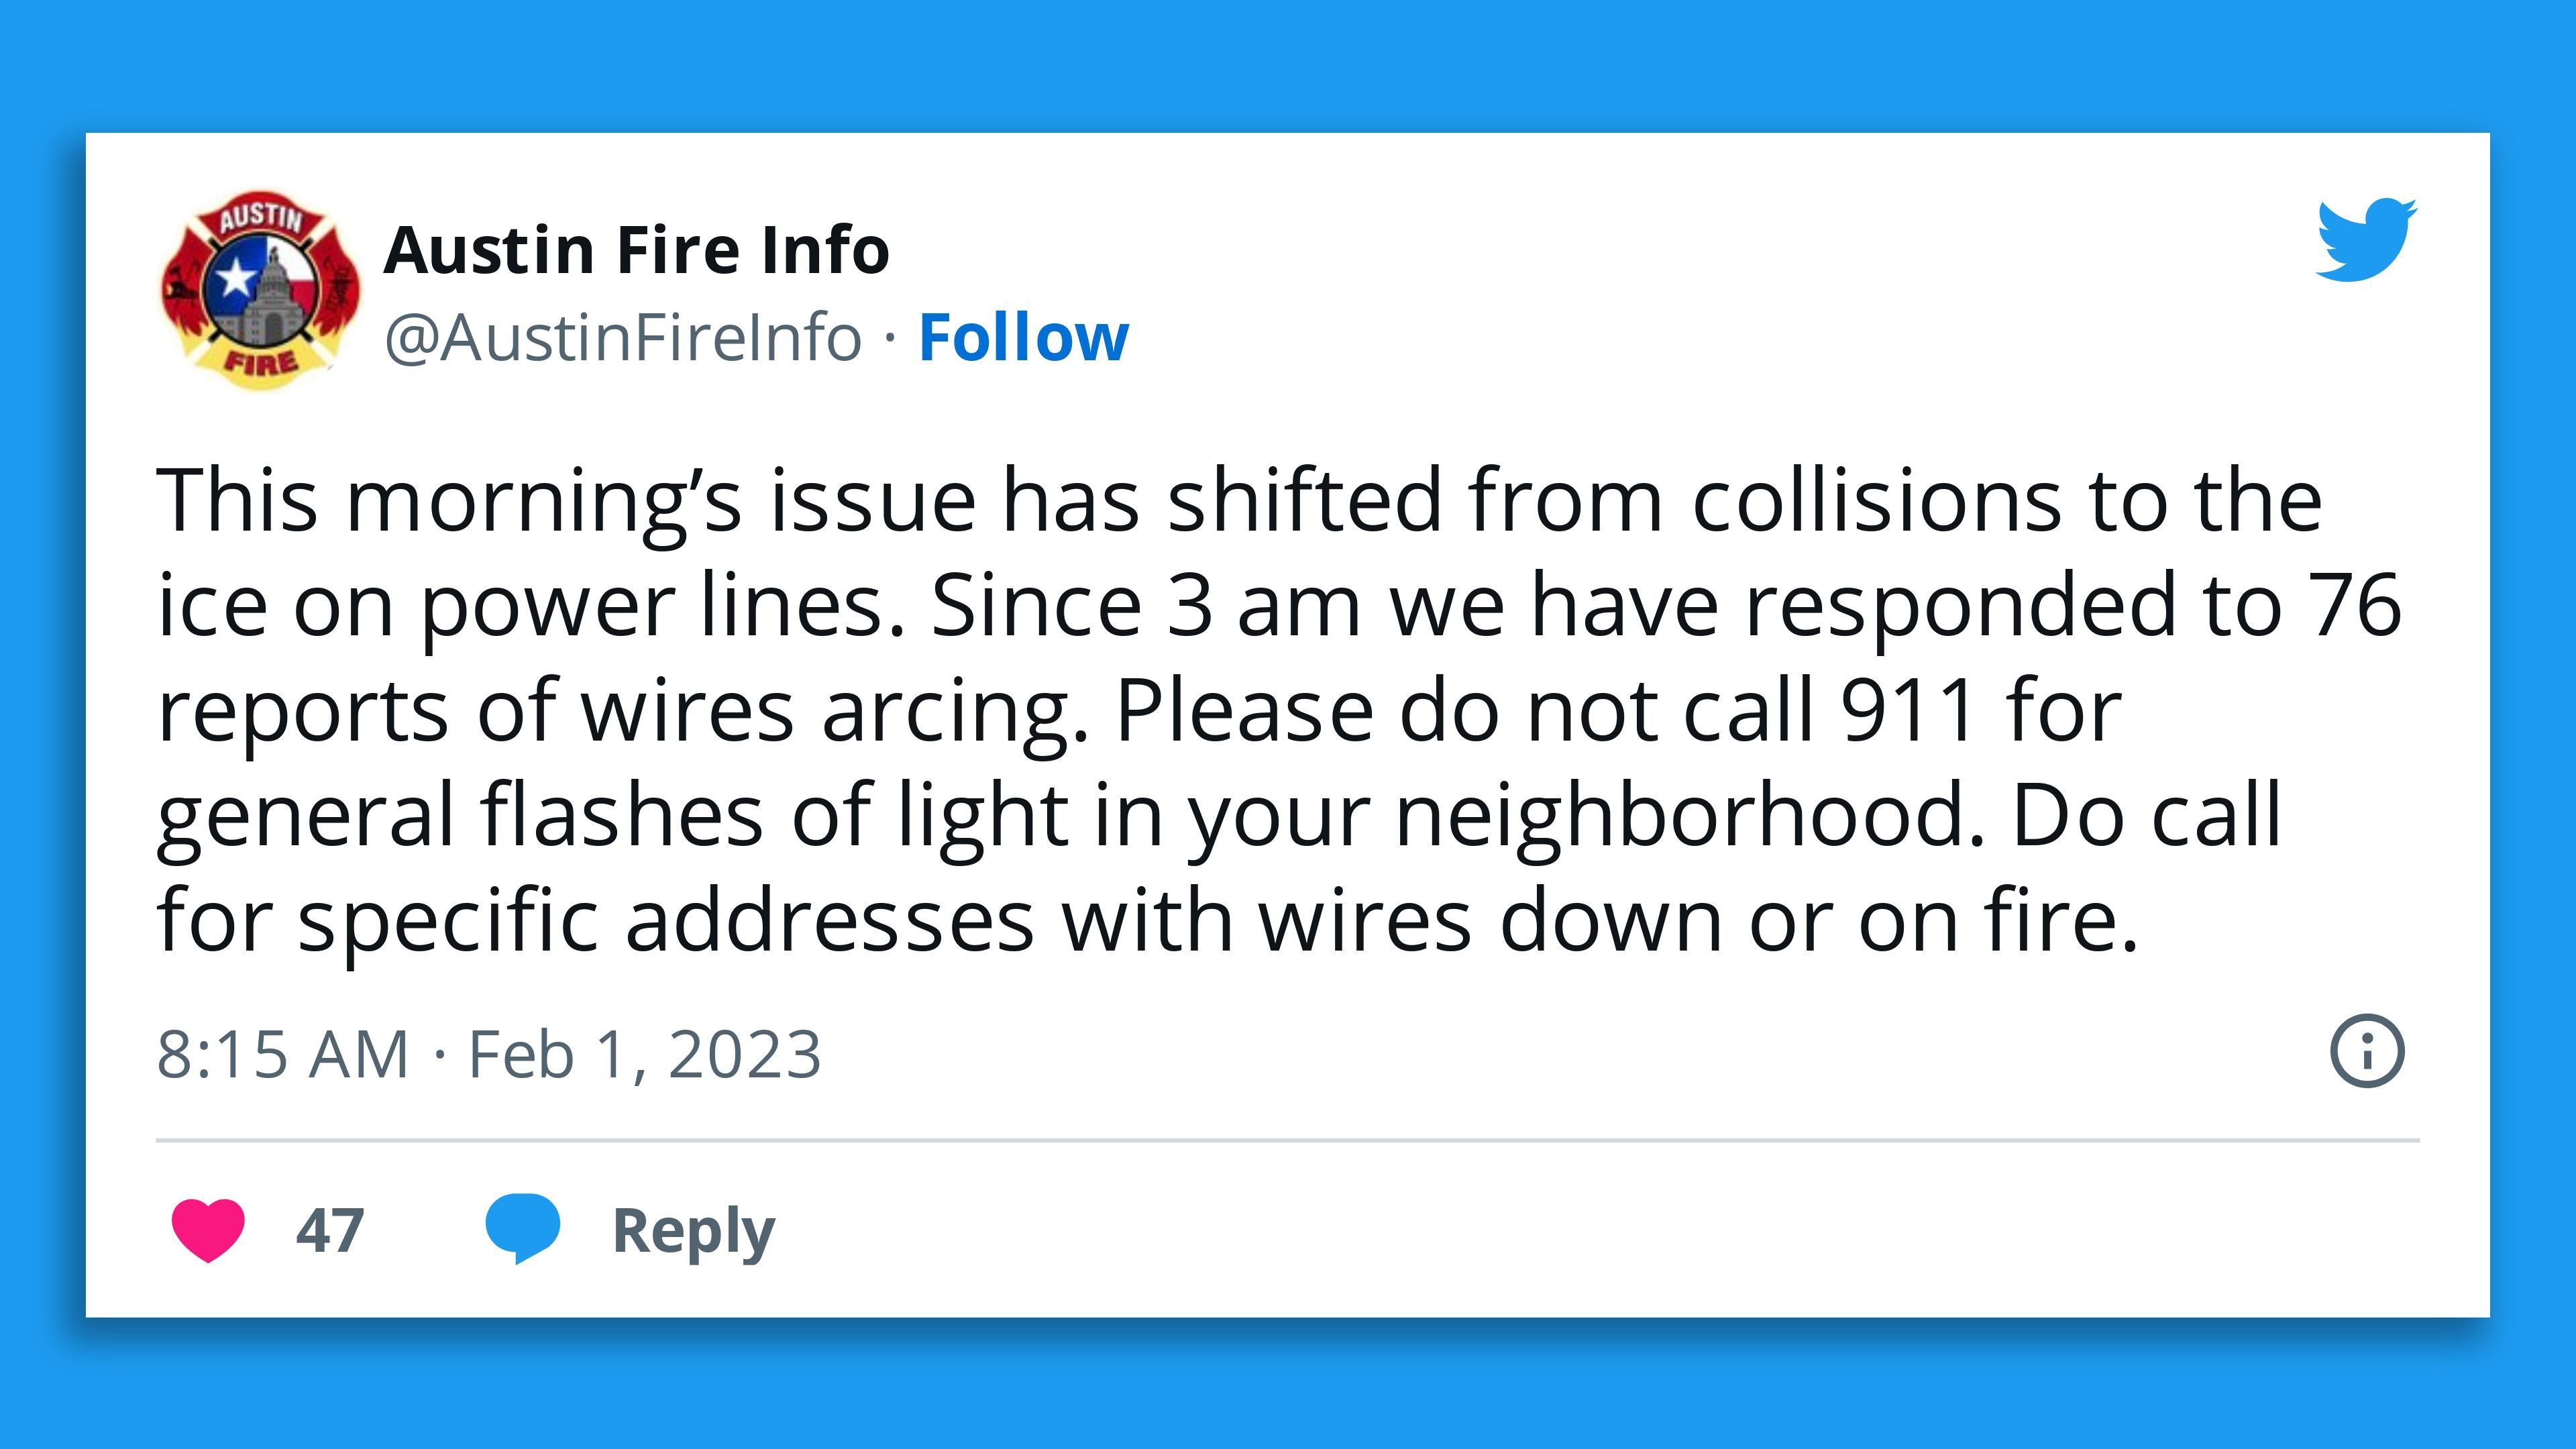 Tweet image from Austin Texas emergency officials.